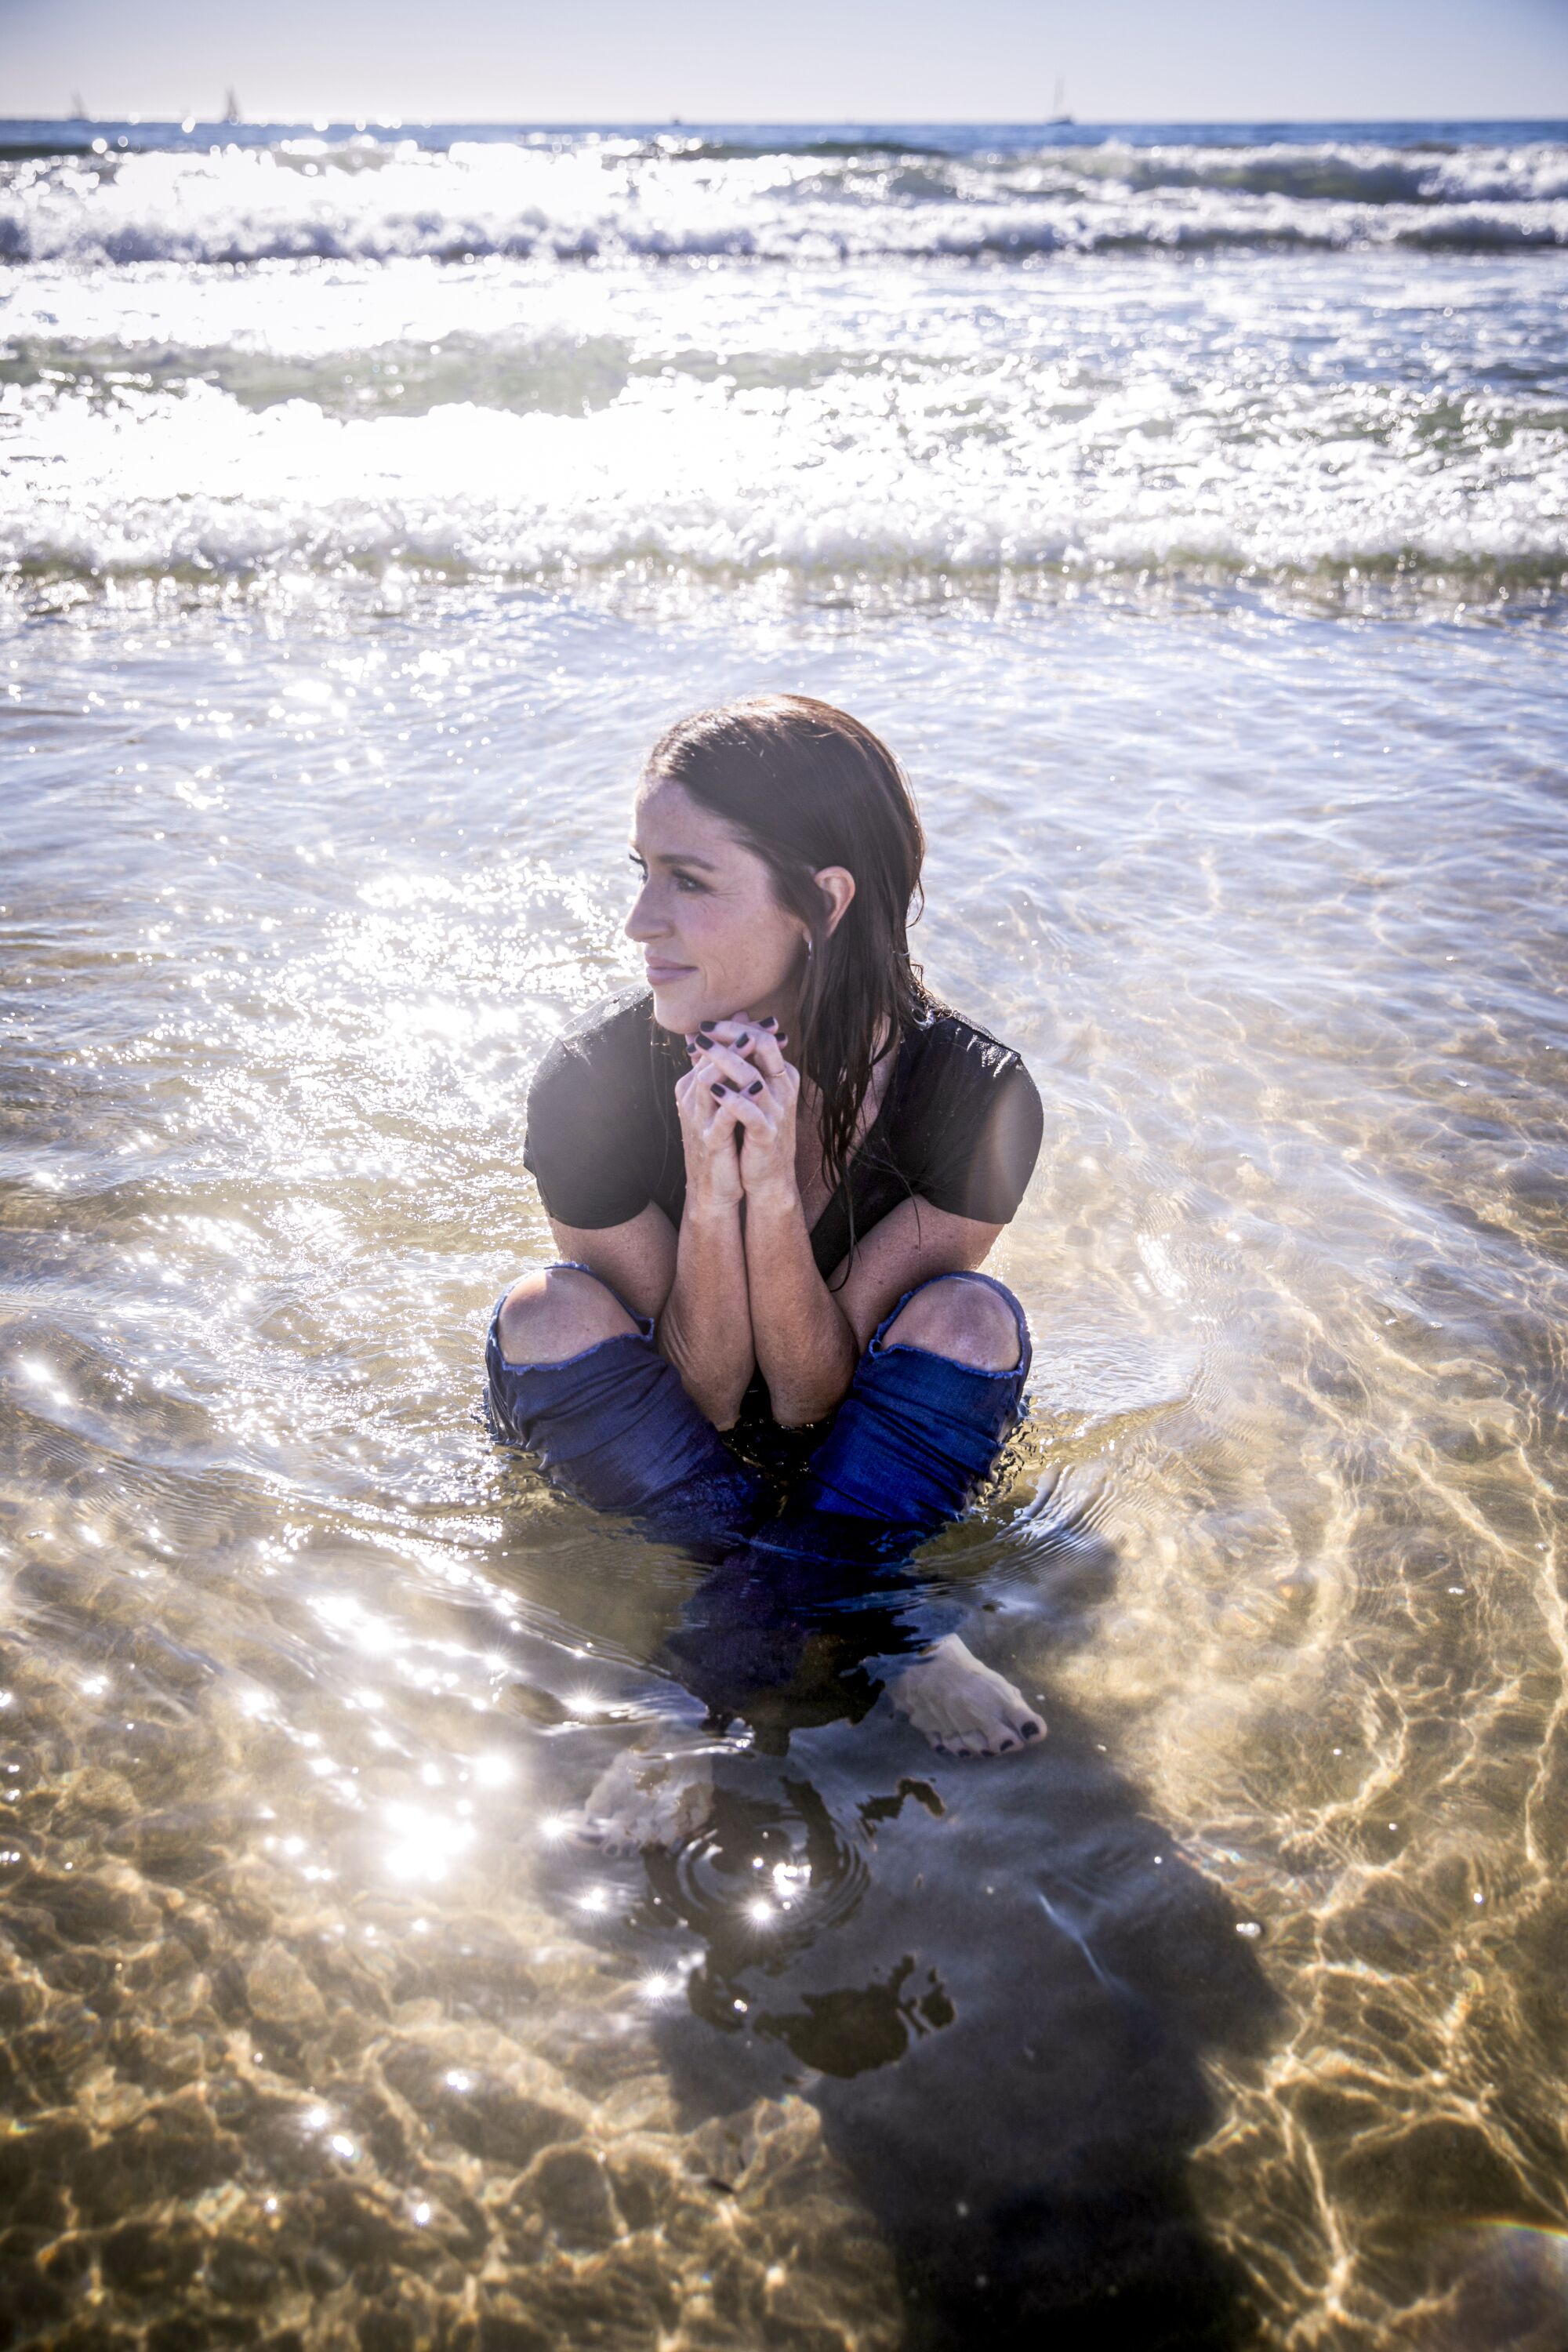 Feb. 21: Actress Soleil Moon Frye sits in the water at the beach as the tide rolls in